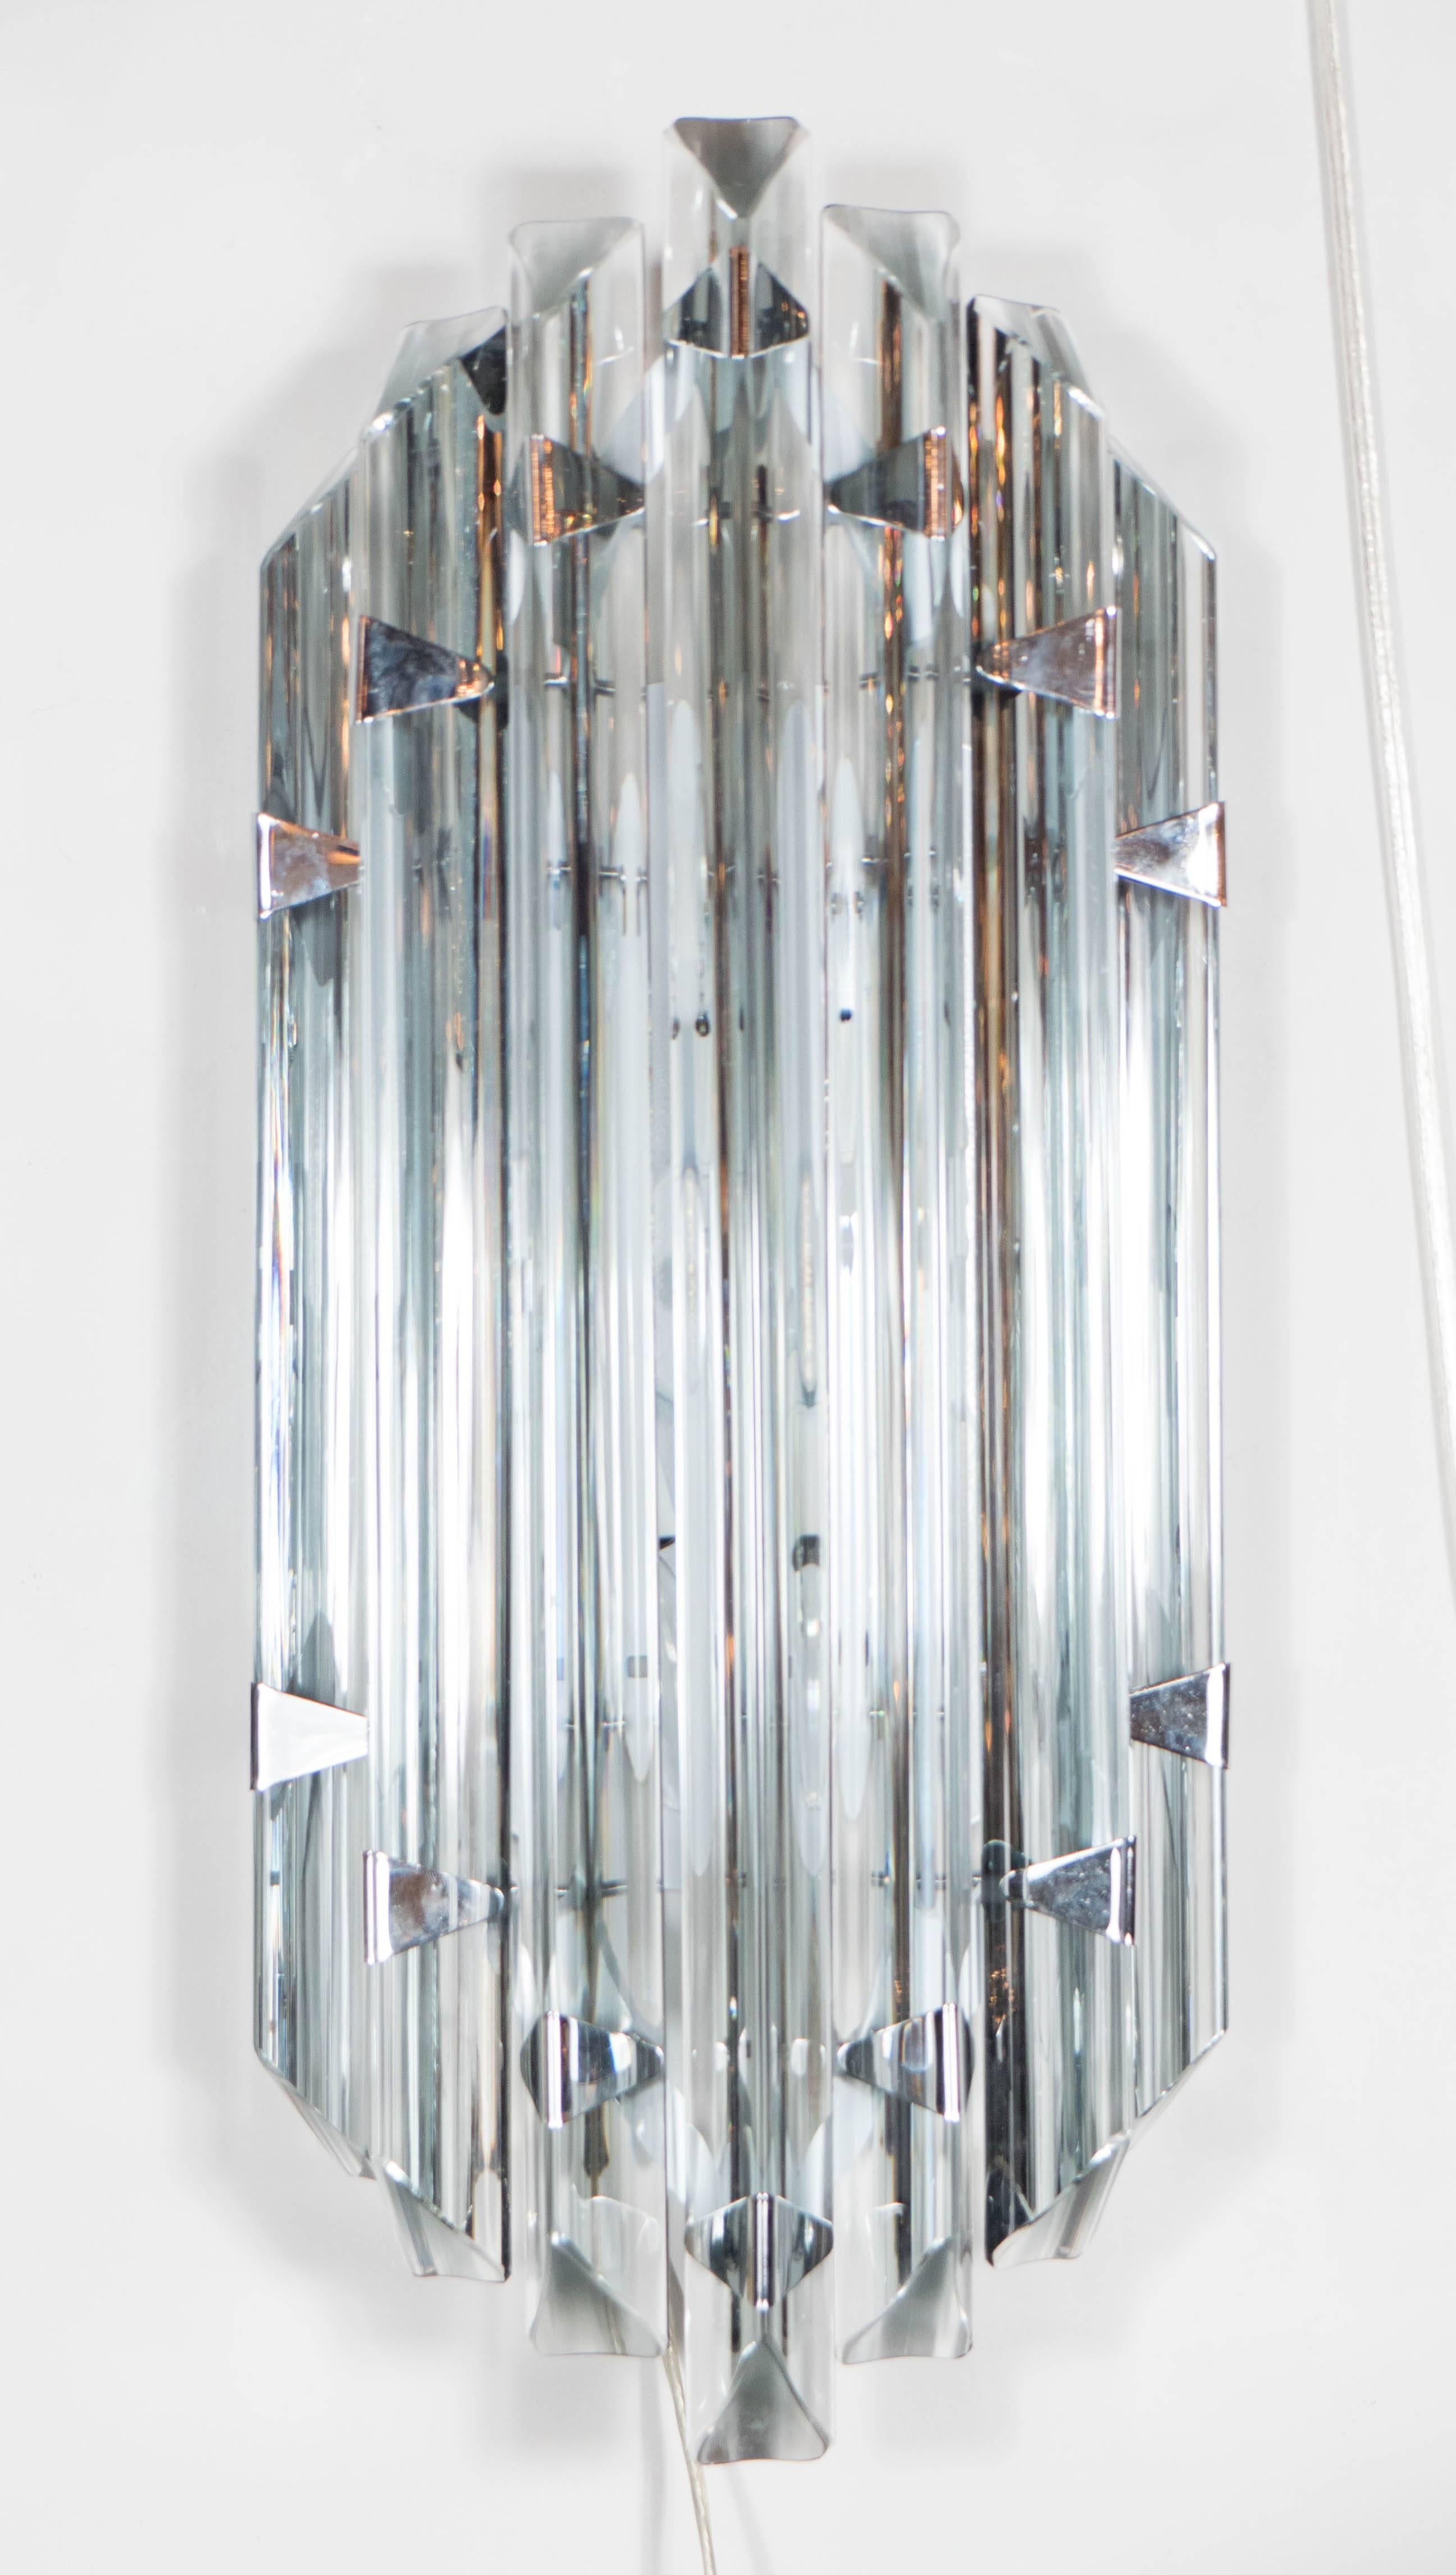 This elegant pair of modernist sconces, realized in the manner of Venini, were handblown in Murano- the island off the coast of Venice renowned for centuries for its superlative glass production. They feature a smoked Murano triedre rods attached to